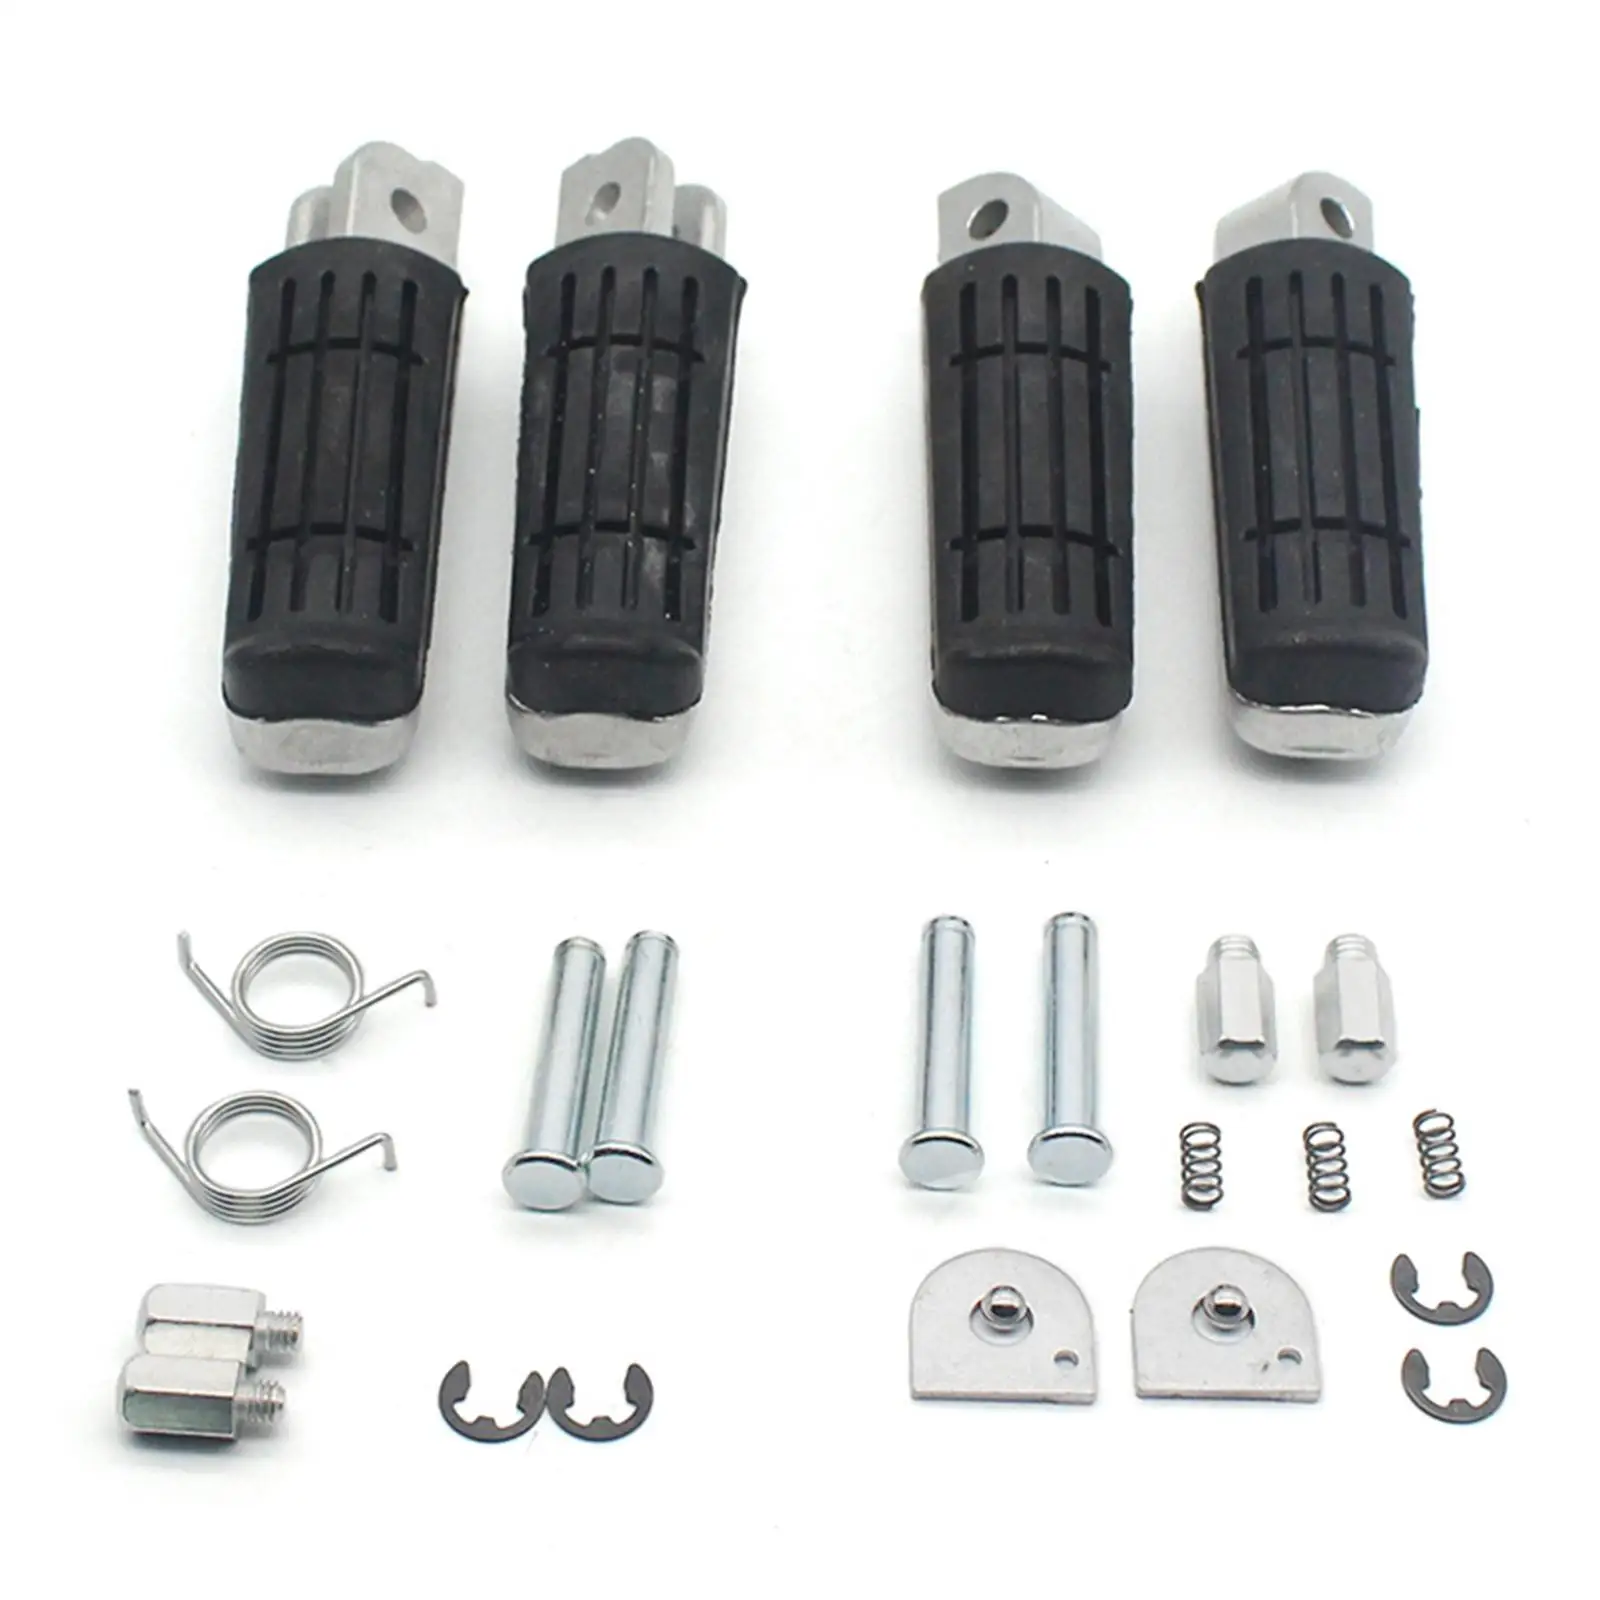 2Pcs Durable Motorcycle Foot Pegs Pedals for YZF1000 R1 FZ6 FJR1300 - $20.05